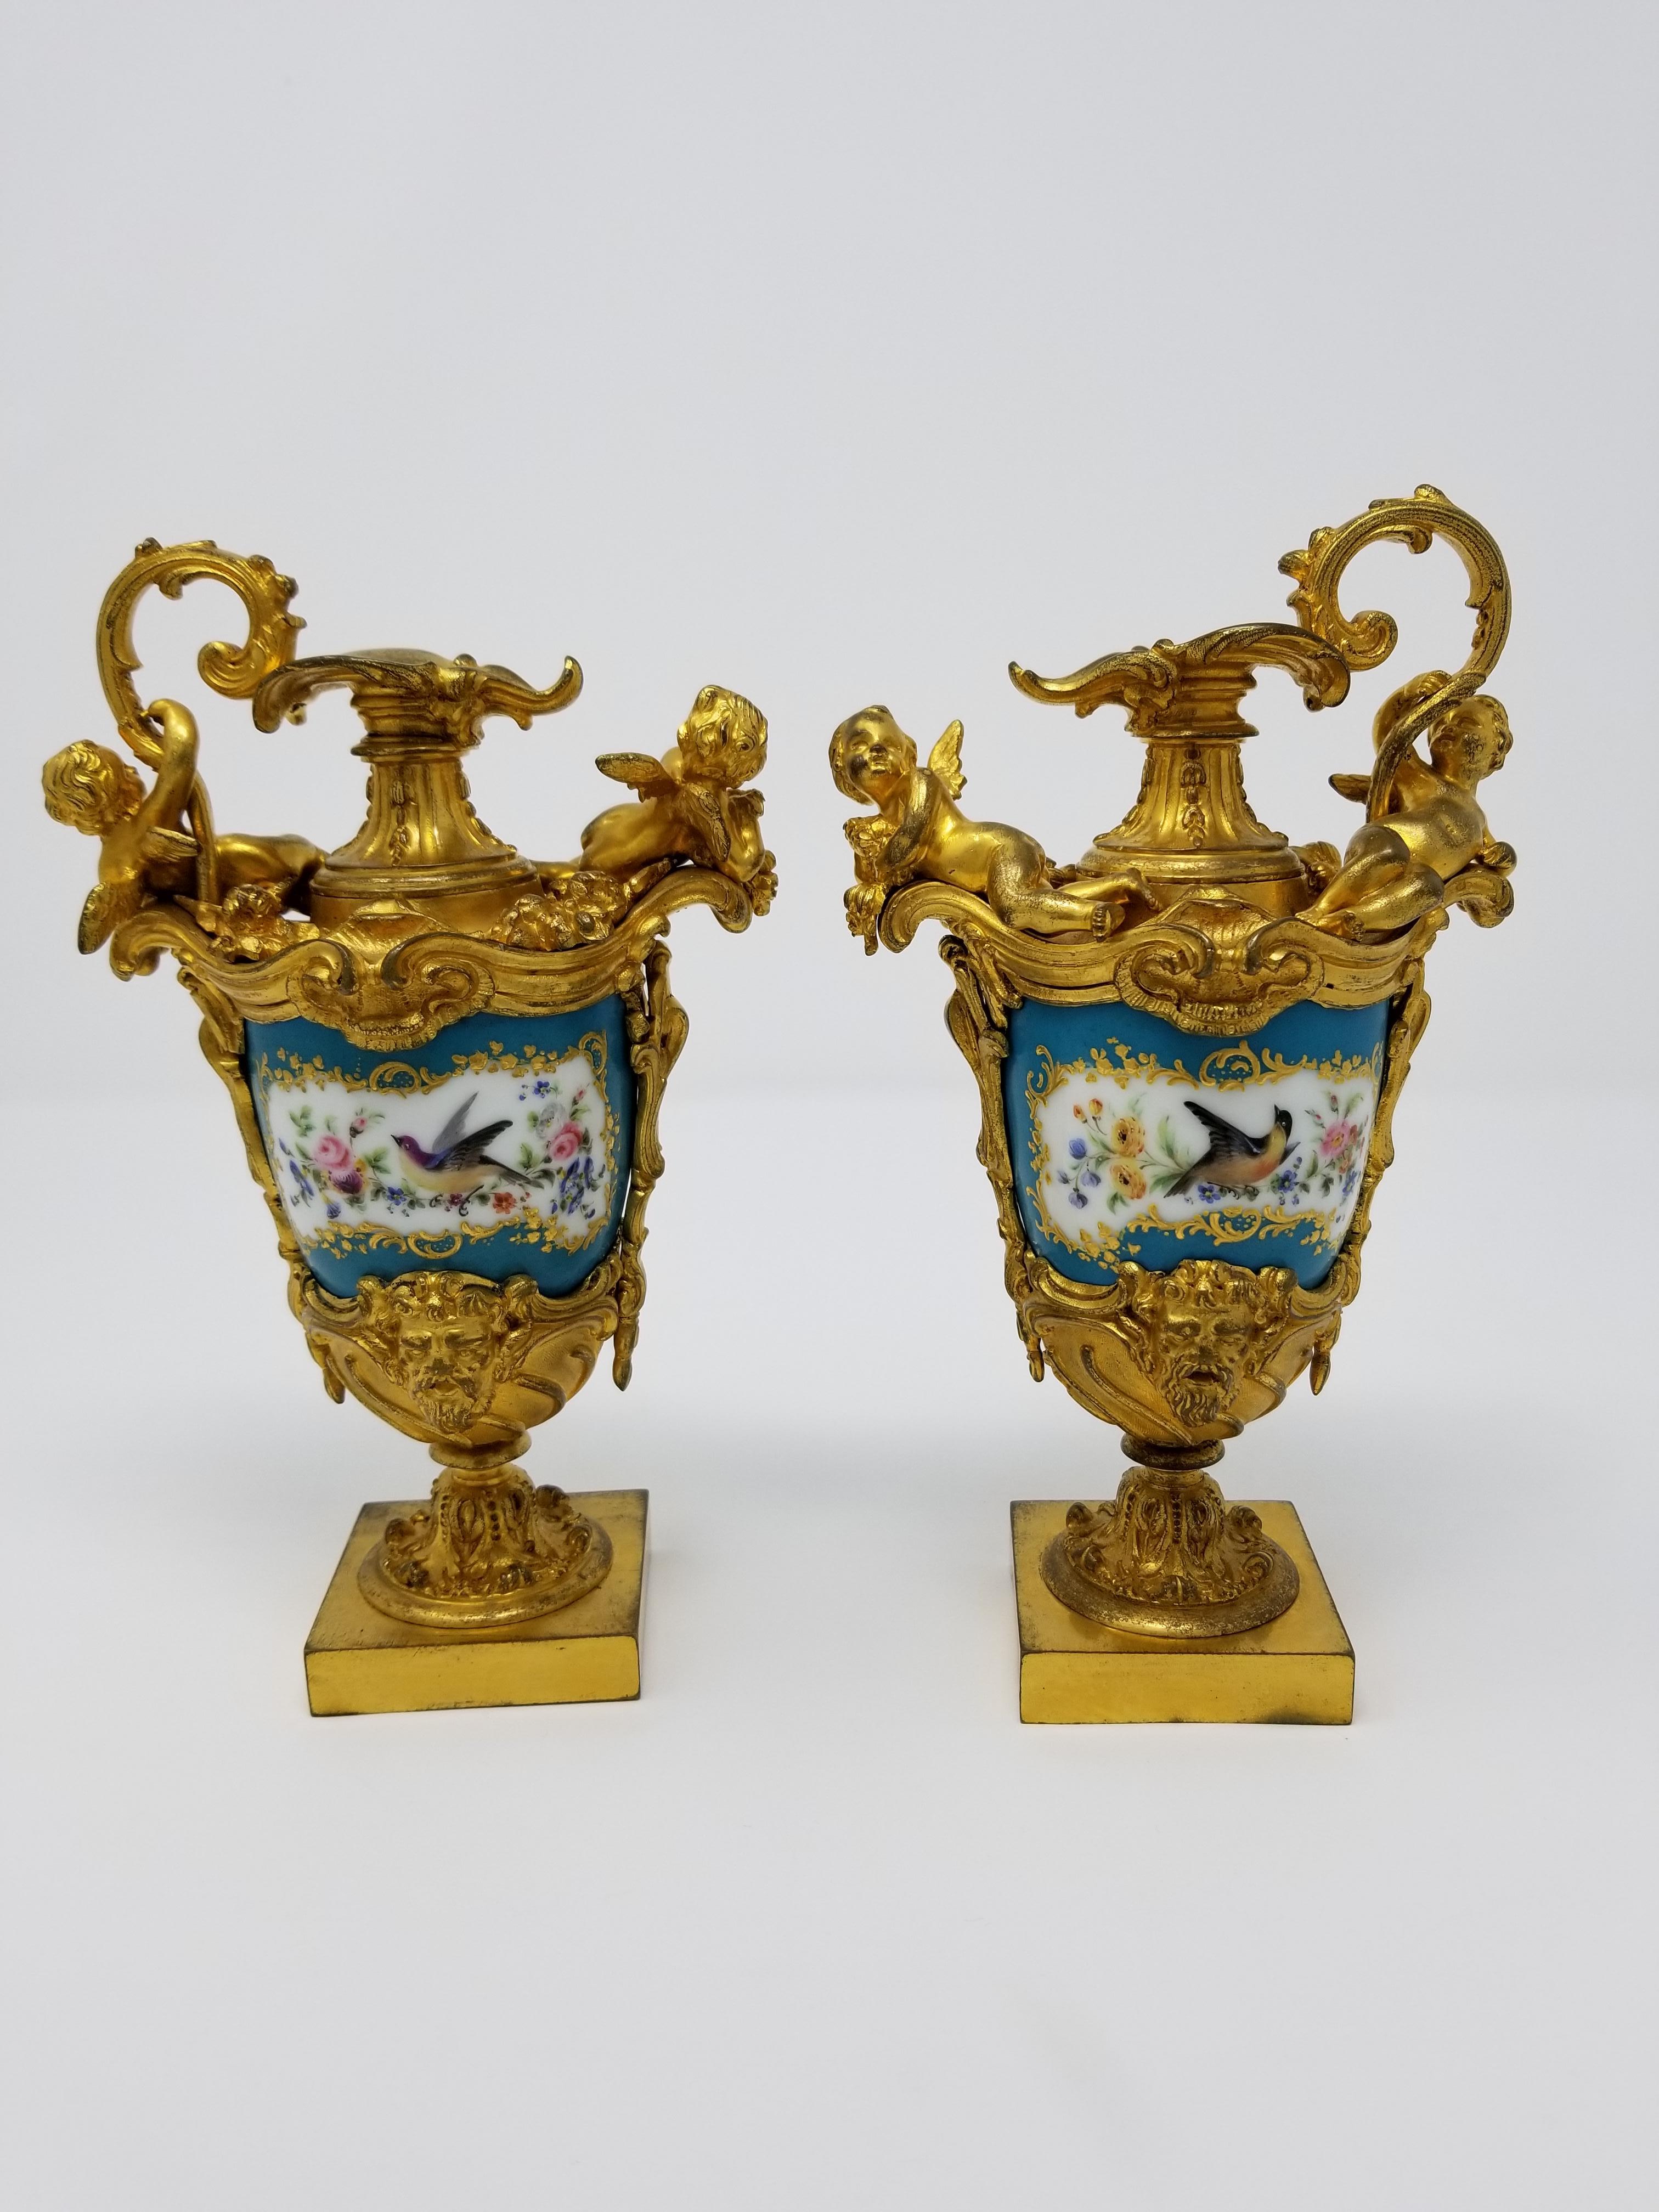 A beautiful pair of 19th century French Sèvres style Porcelain and ormolu-mounted ewers which are hand painted in Sèvres celest blue color porcelain. Each ewer is very finely hand painted with bird scenes in poly-chrome enamels on one side; and